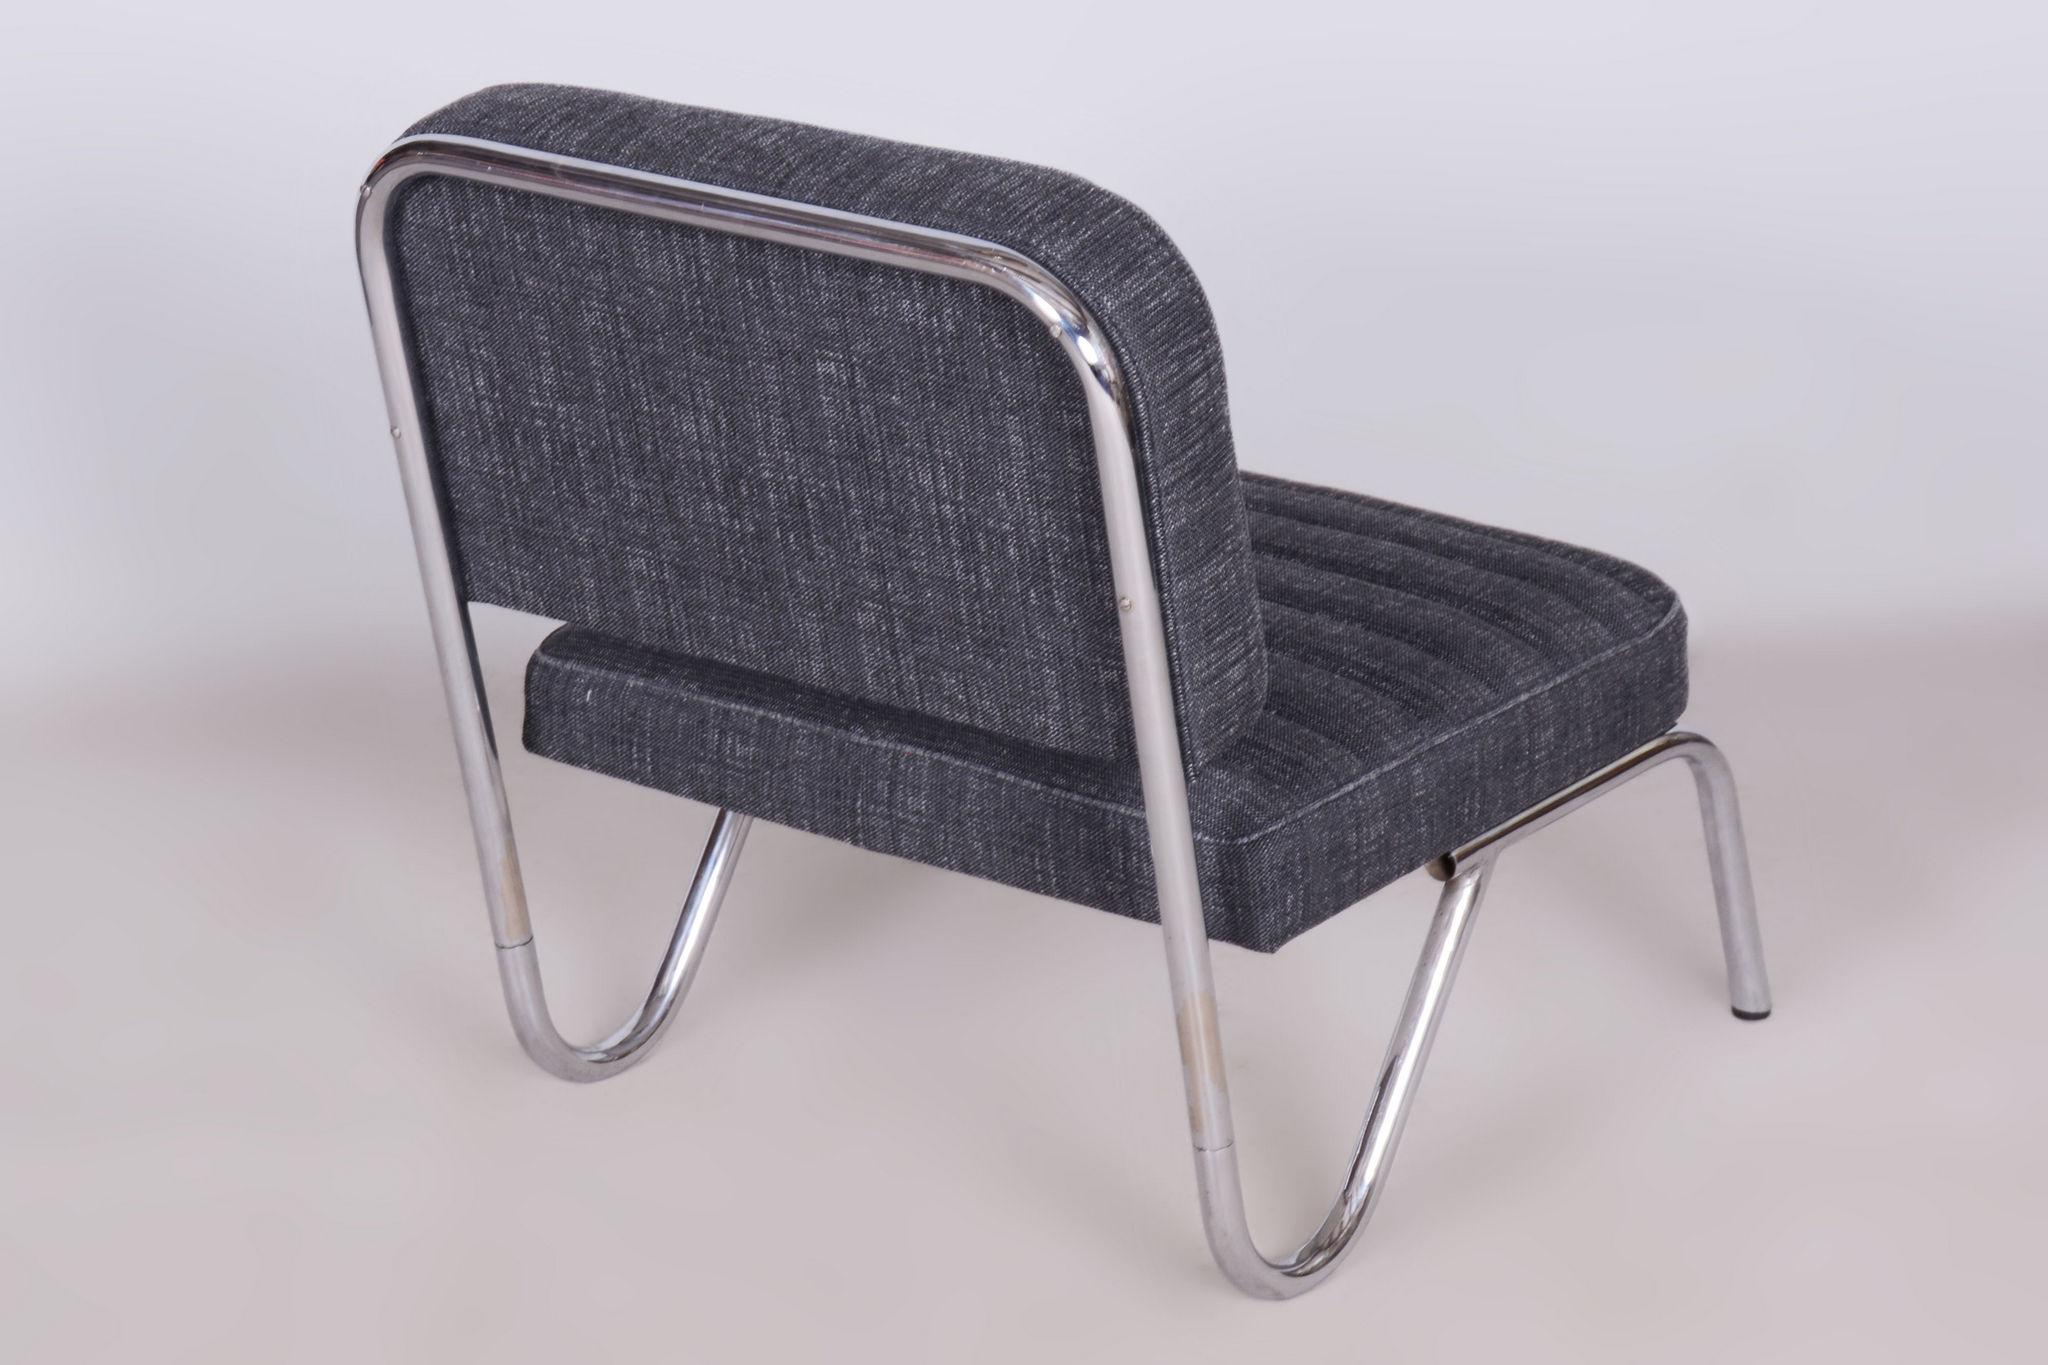 Mid-20th Century Restored Bauhaus Small Chair Stool, Chrome, Czechia, 1940s For Sale